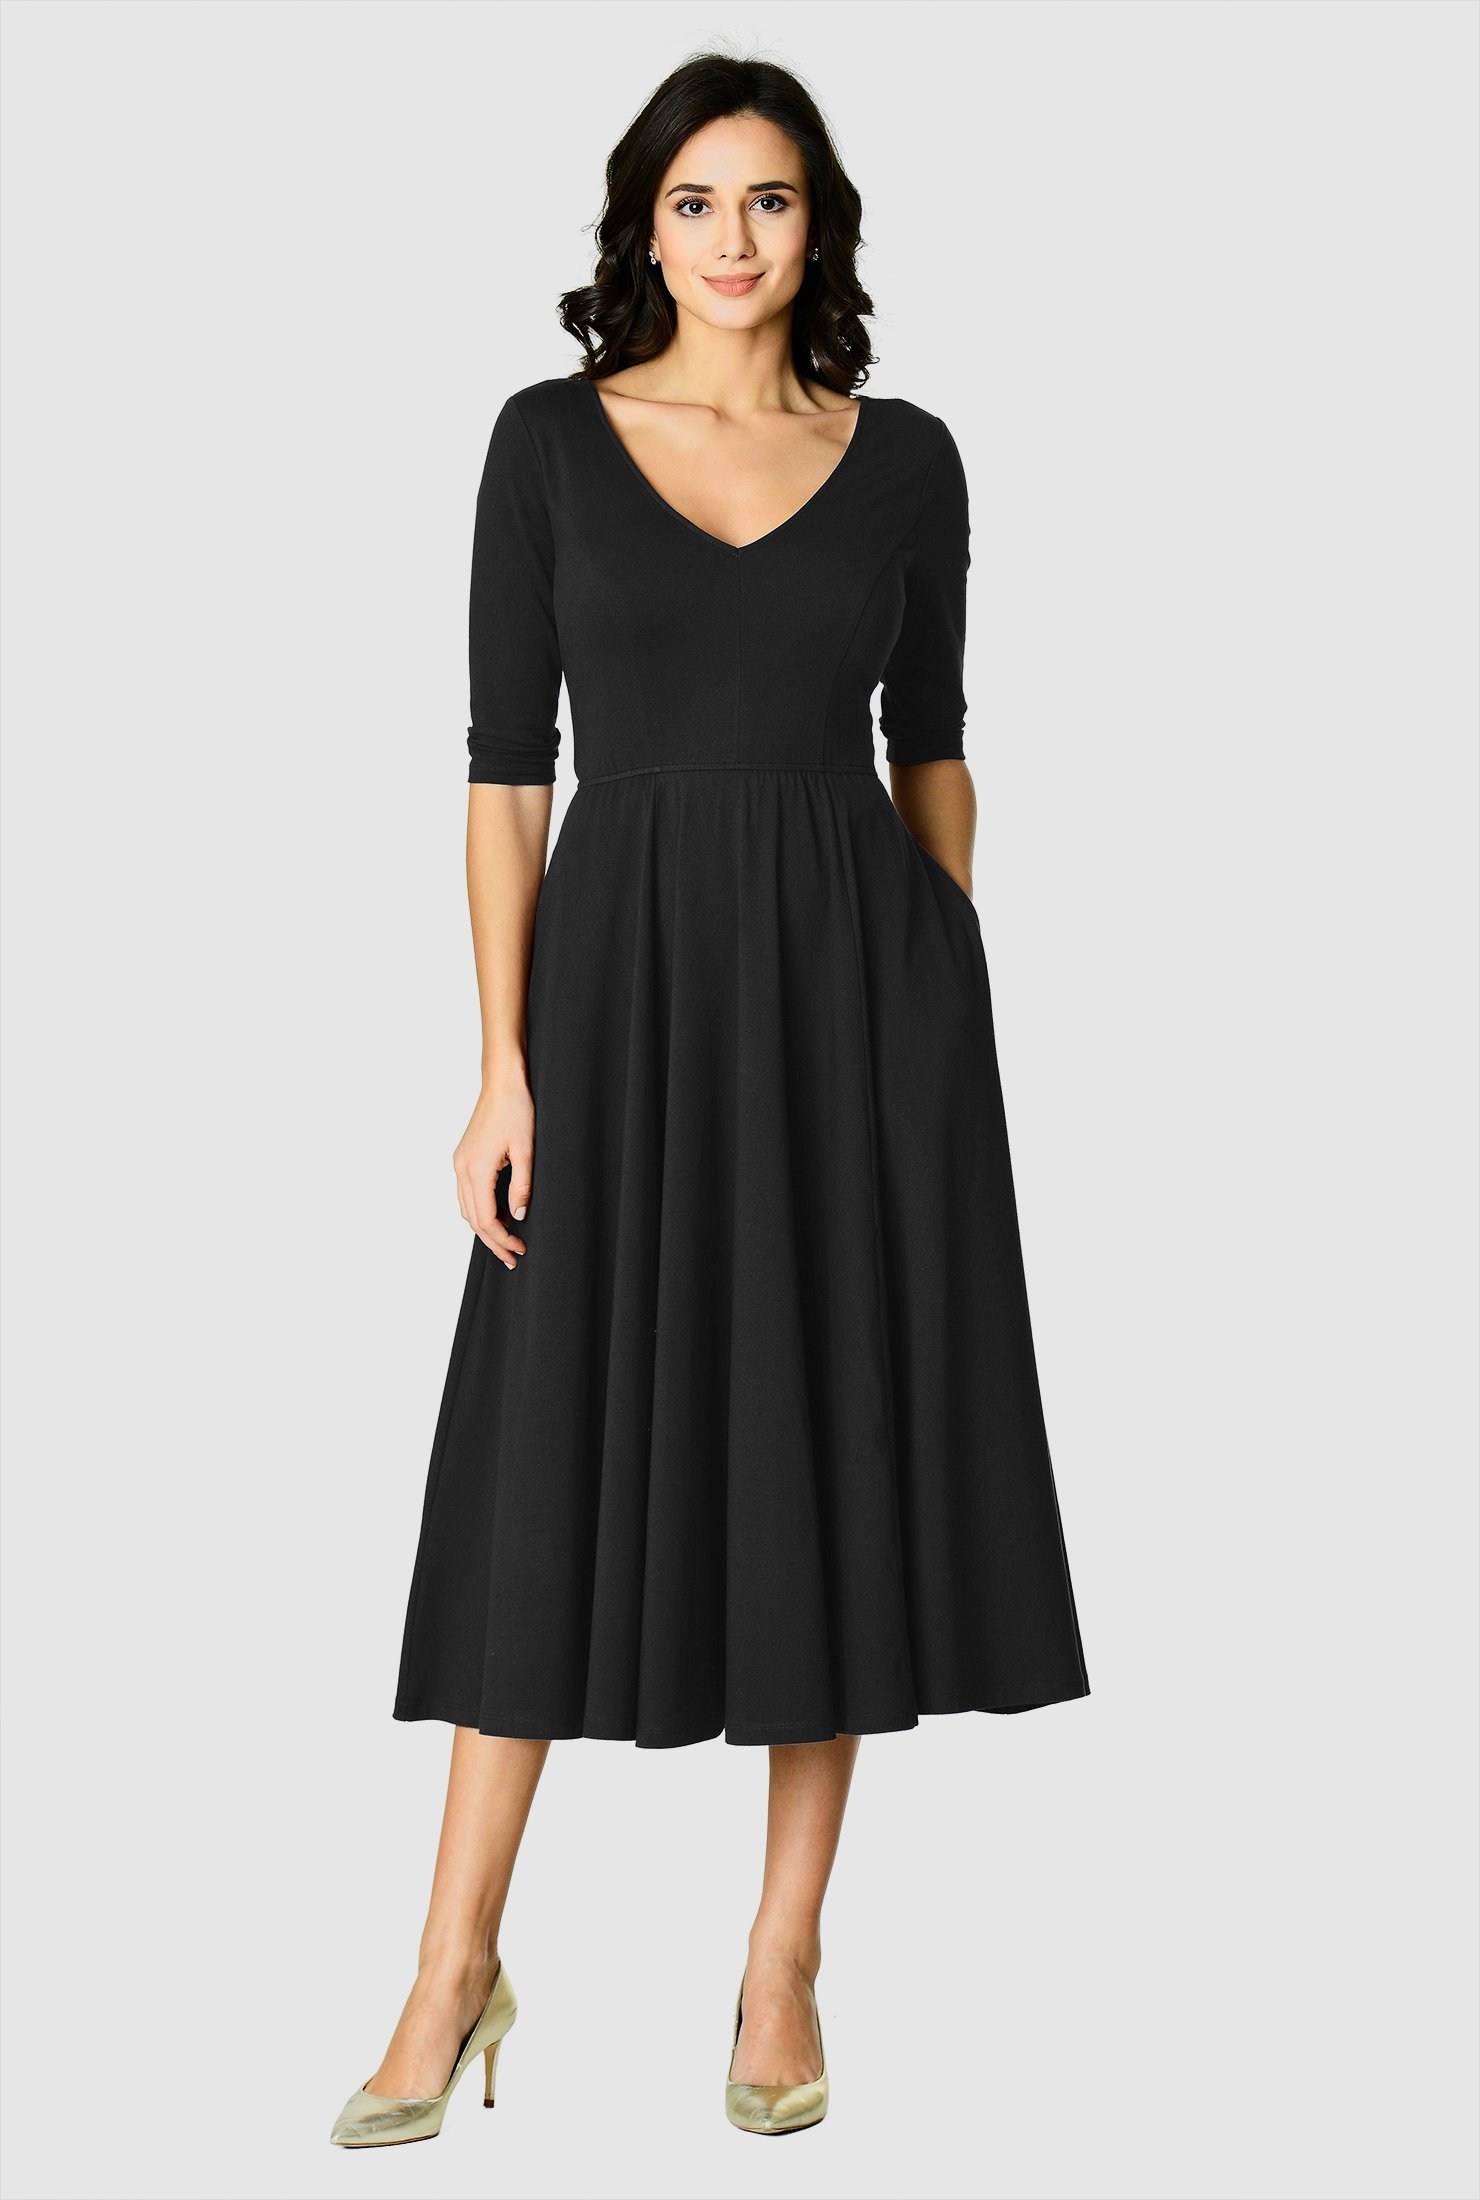 Cotton jersey fit and flare dress